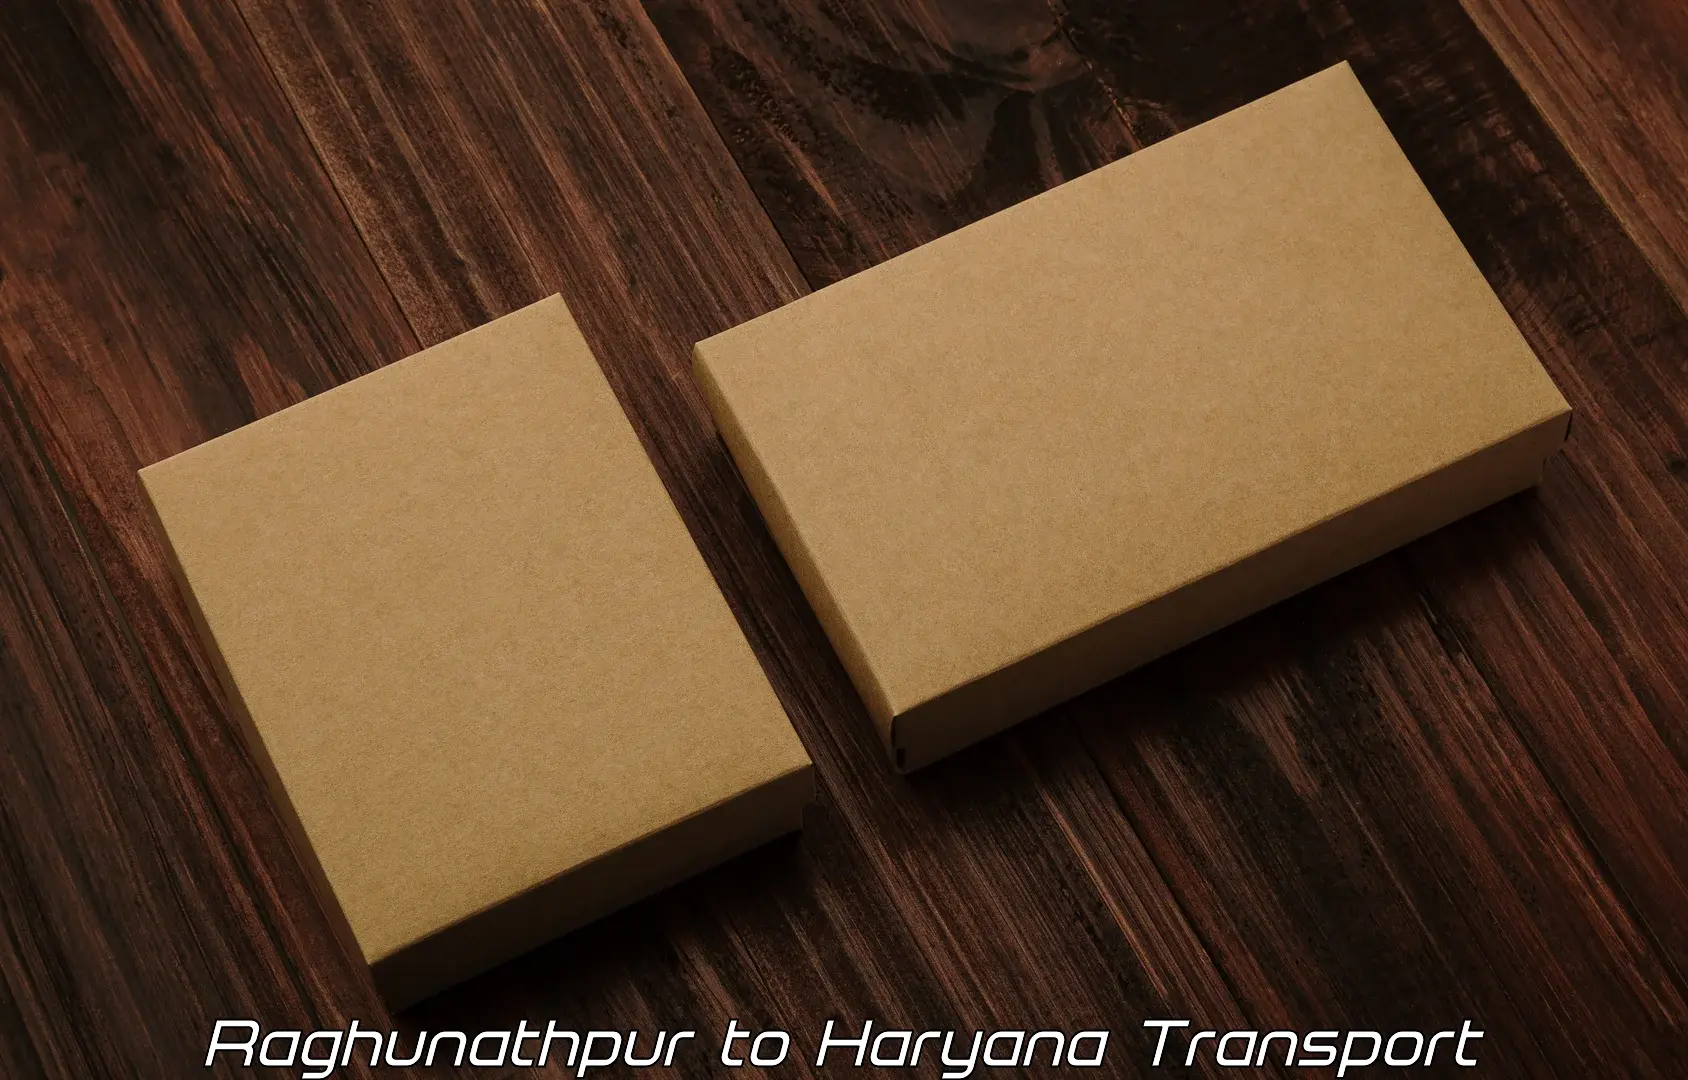 Air freight transport services in Raghunathpur to Fatehabad